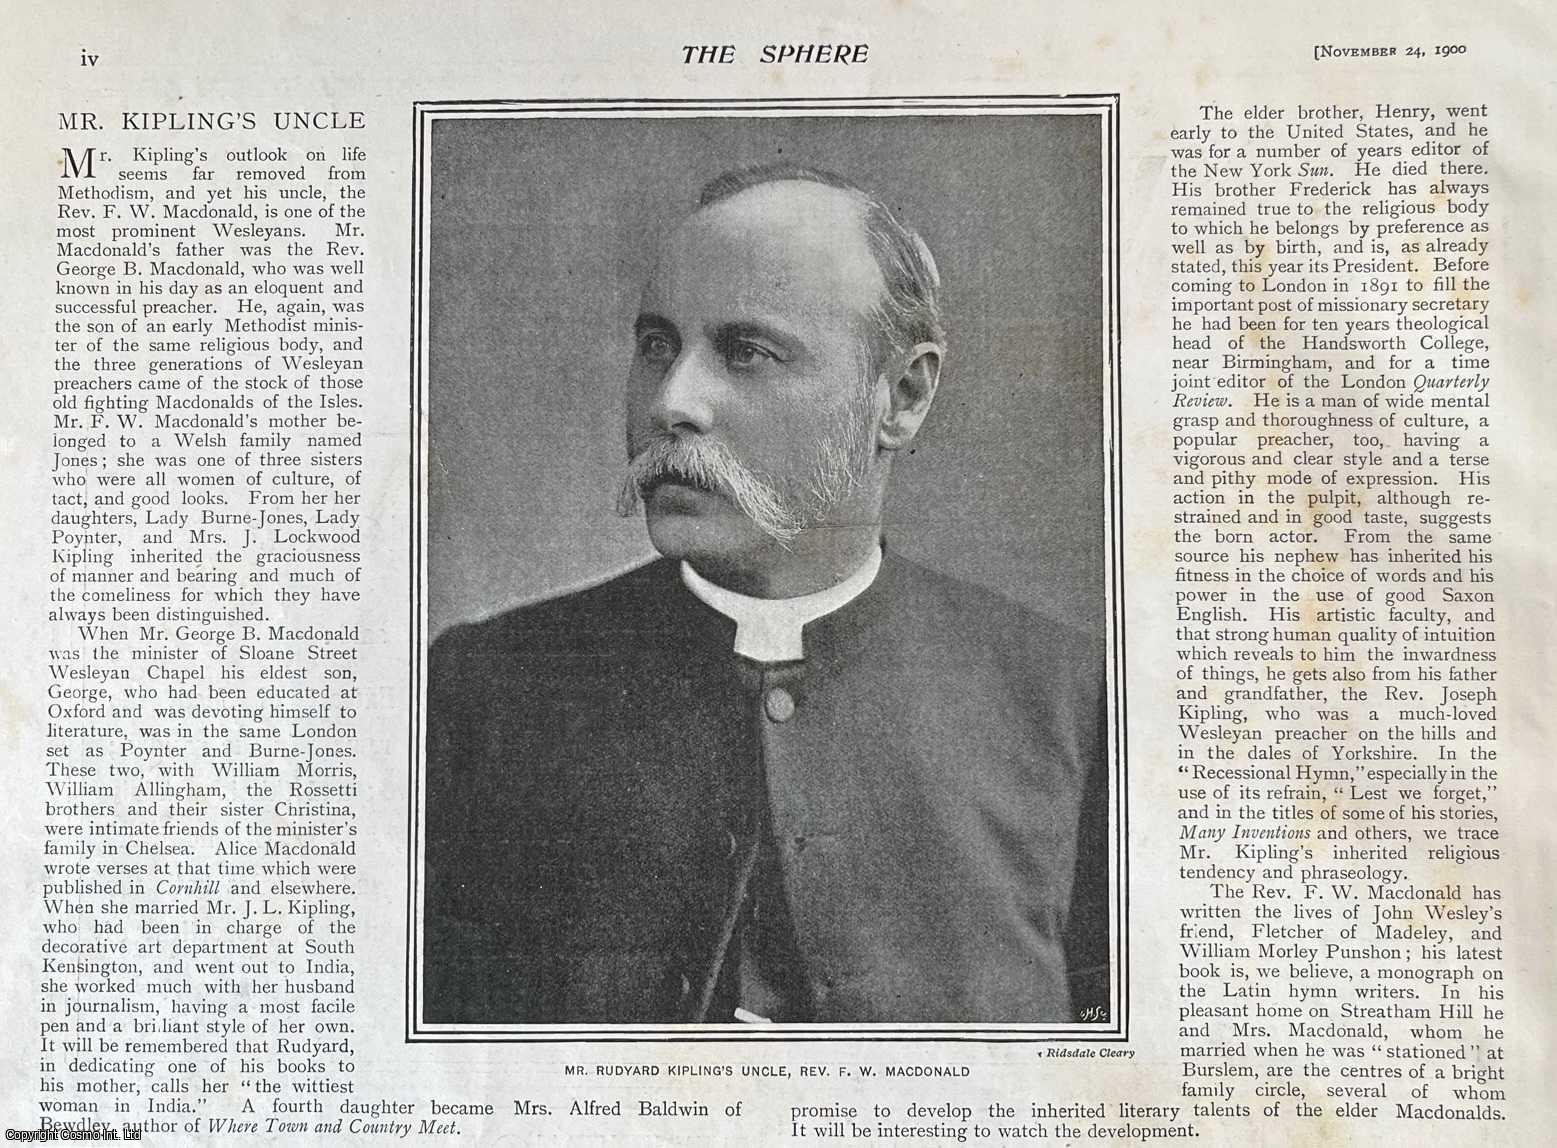 REV. F.W. MACDONALD - Portrait of Rudyard Kipling's Uncle, Rev. F.W. Macdonald, Prominent Wesleyan. Photographic print, with brief accompanying text, from the Sphere, an Illustrated Newspaper, 1900.